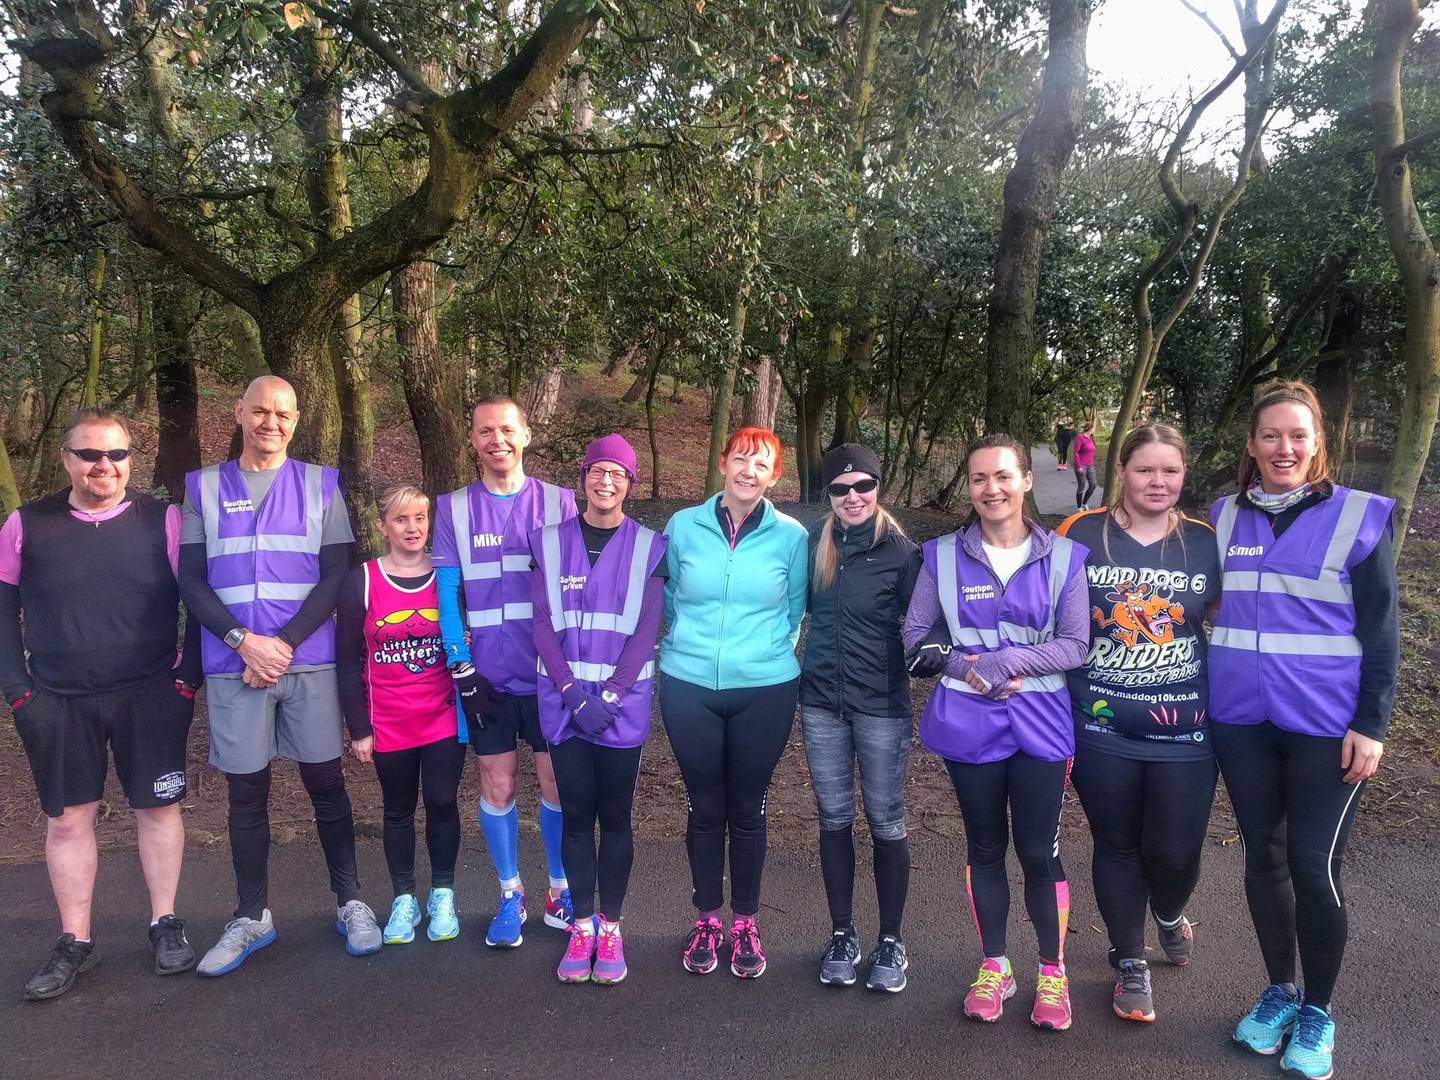 Members of the Southport parkrun group. Left to right: James and Terry (guide), Kelly and Mike (guide), Jen (guide) and Karen, Rachel (guide) and Catherine, Donna and Sarah (guide).